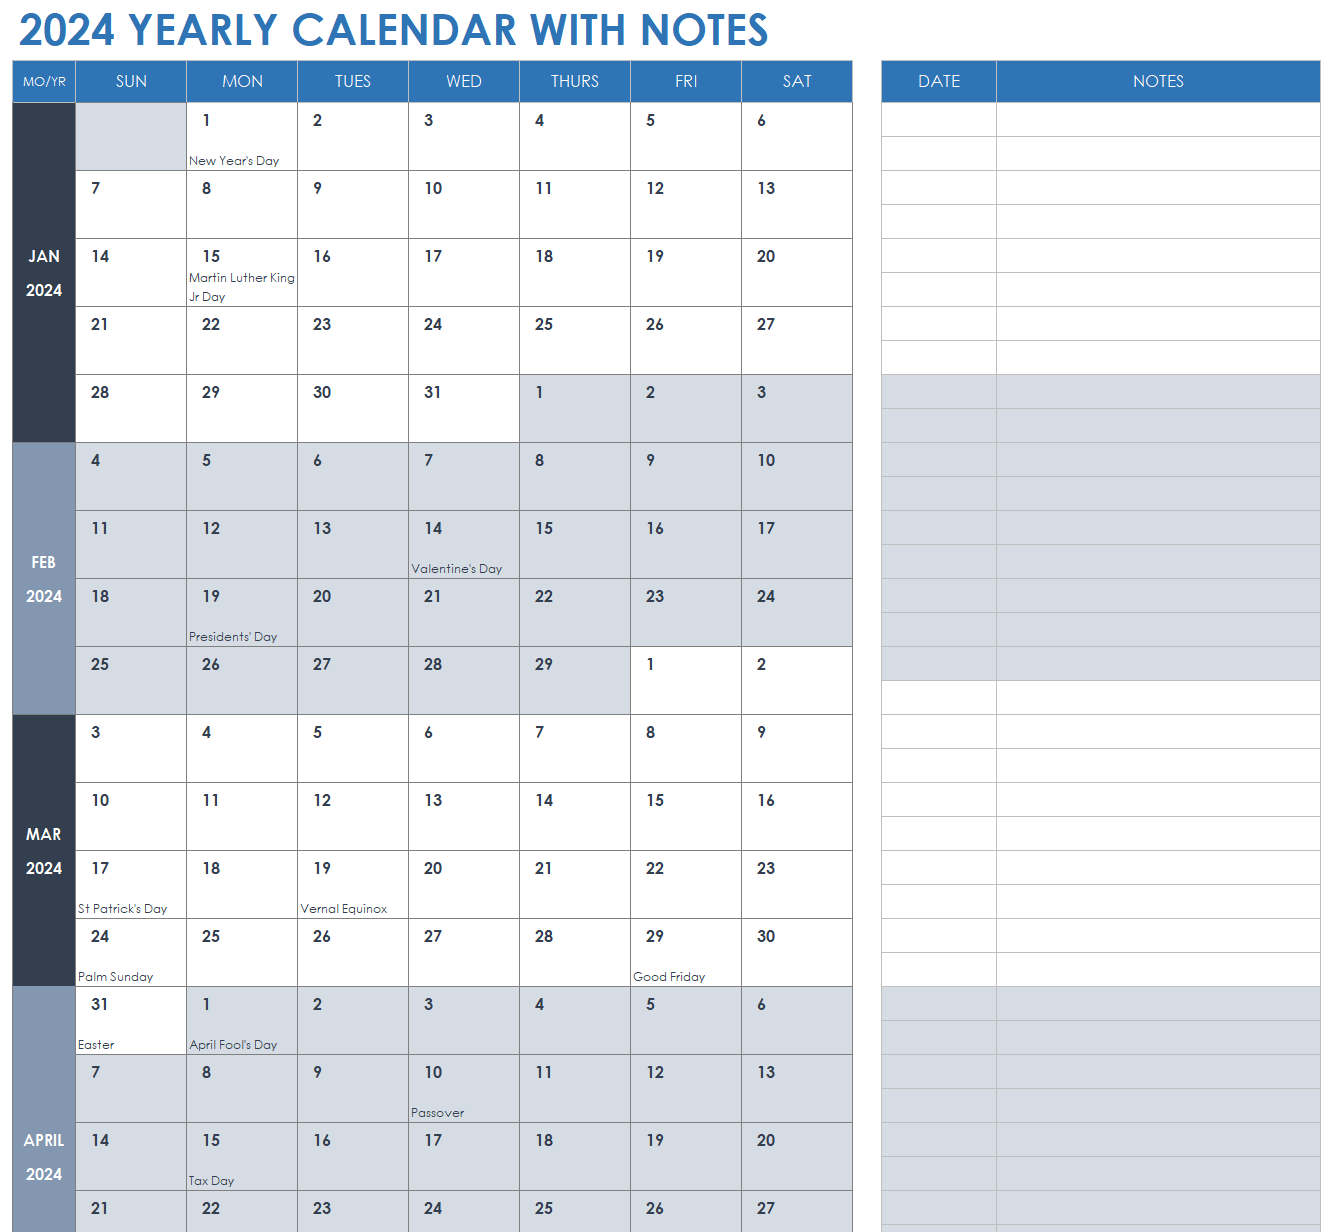 How To Sync My 2024 Yearly Calendar With Other Devices In Excel Dec